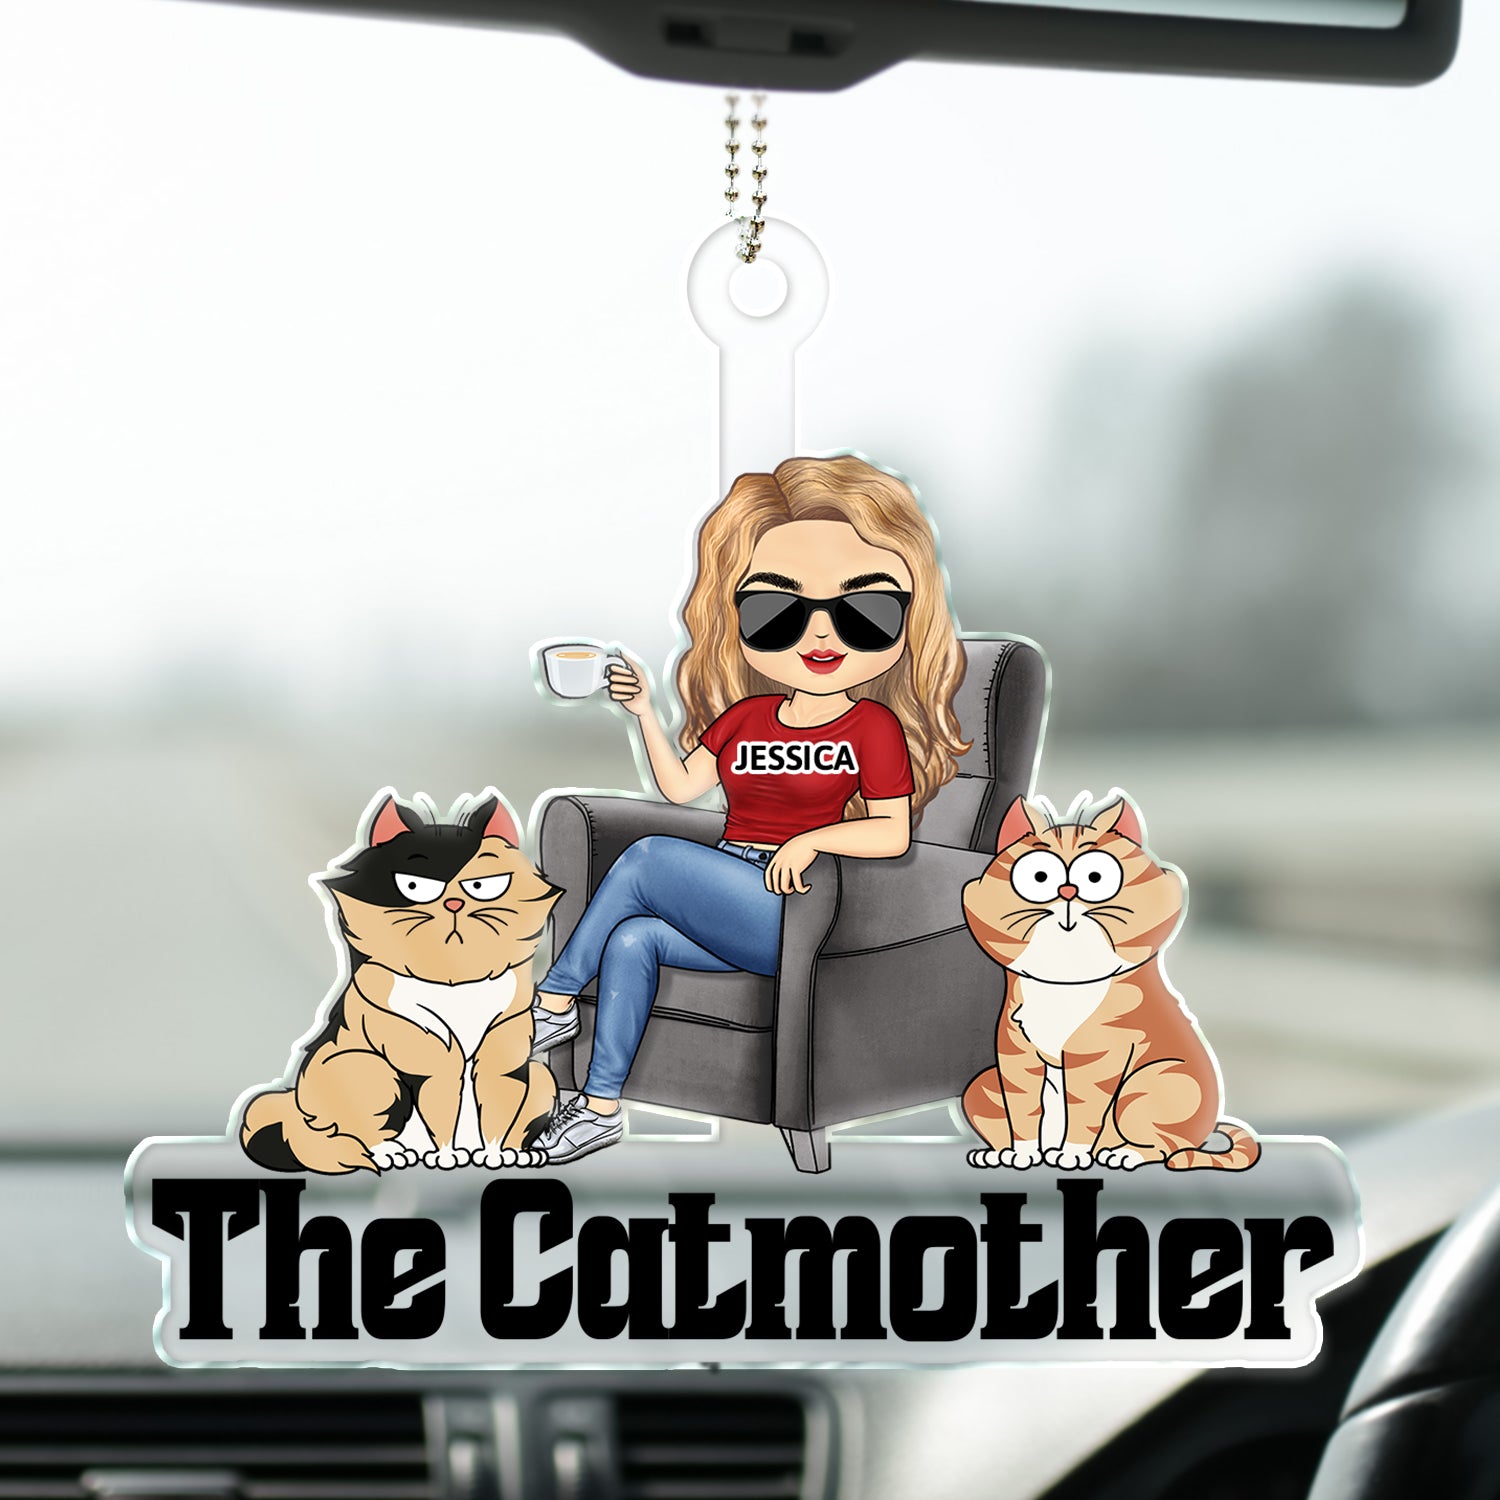 The Cat Mother - Gift For Cat Moms, Cat Lovers - Personalized Acrylic Car Hanger